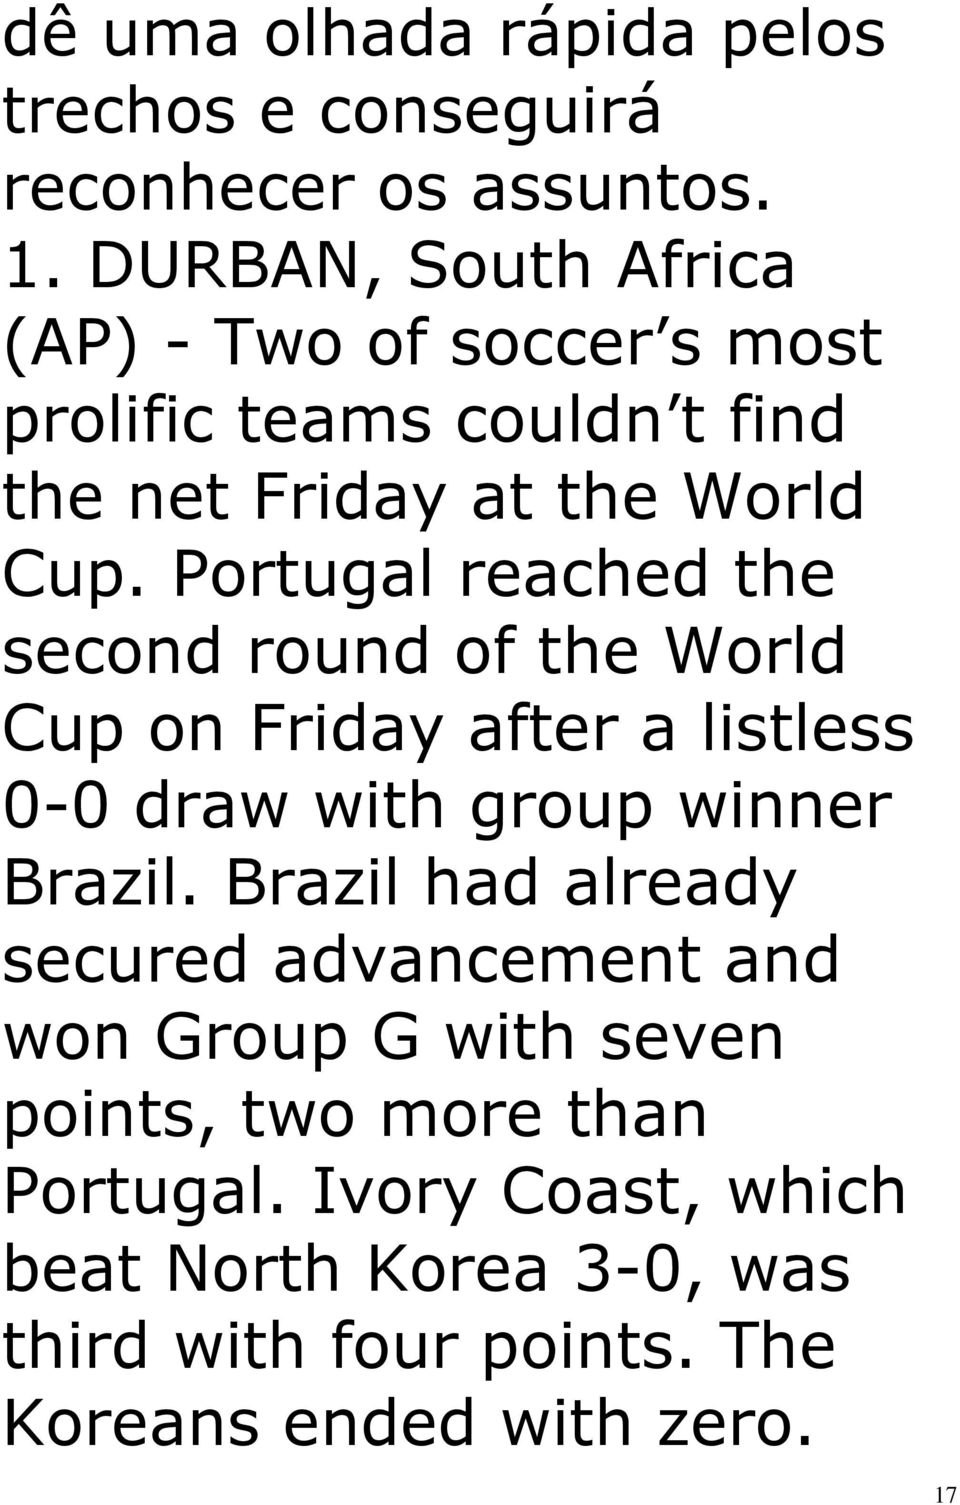 Portugal reached the second round of the World Cup on Friday after a listless 0-0 draw with group winner Brazil.